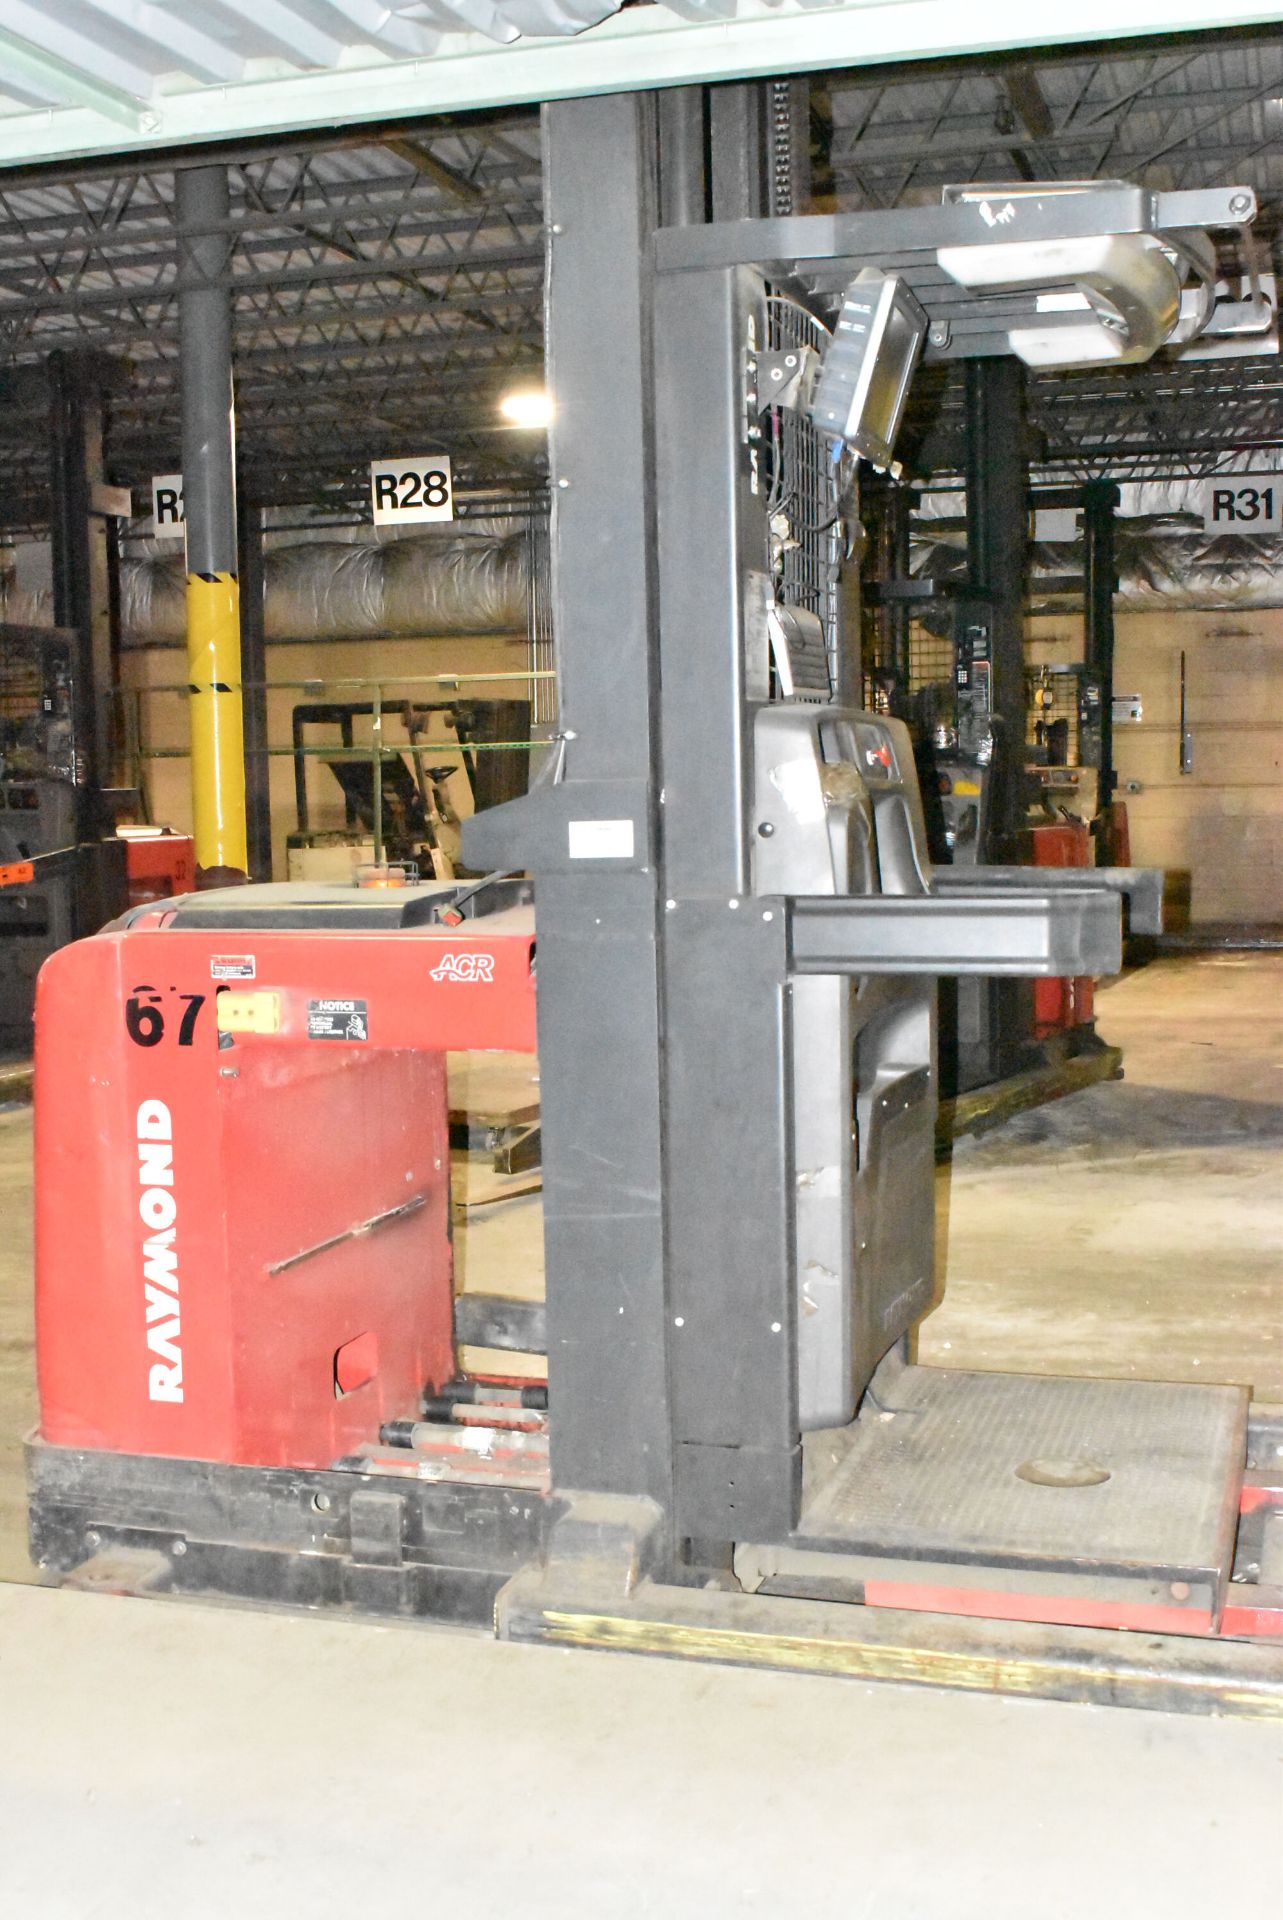 RAYMOND (2014) 560-OPC30TT 1,700 LB. CAPACITY 36V ELECTRIC ORDER PICKER WITH 330" MAX. LIFT - Image 2 of 9